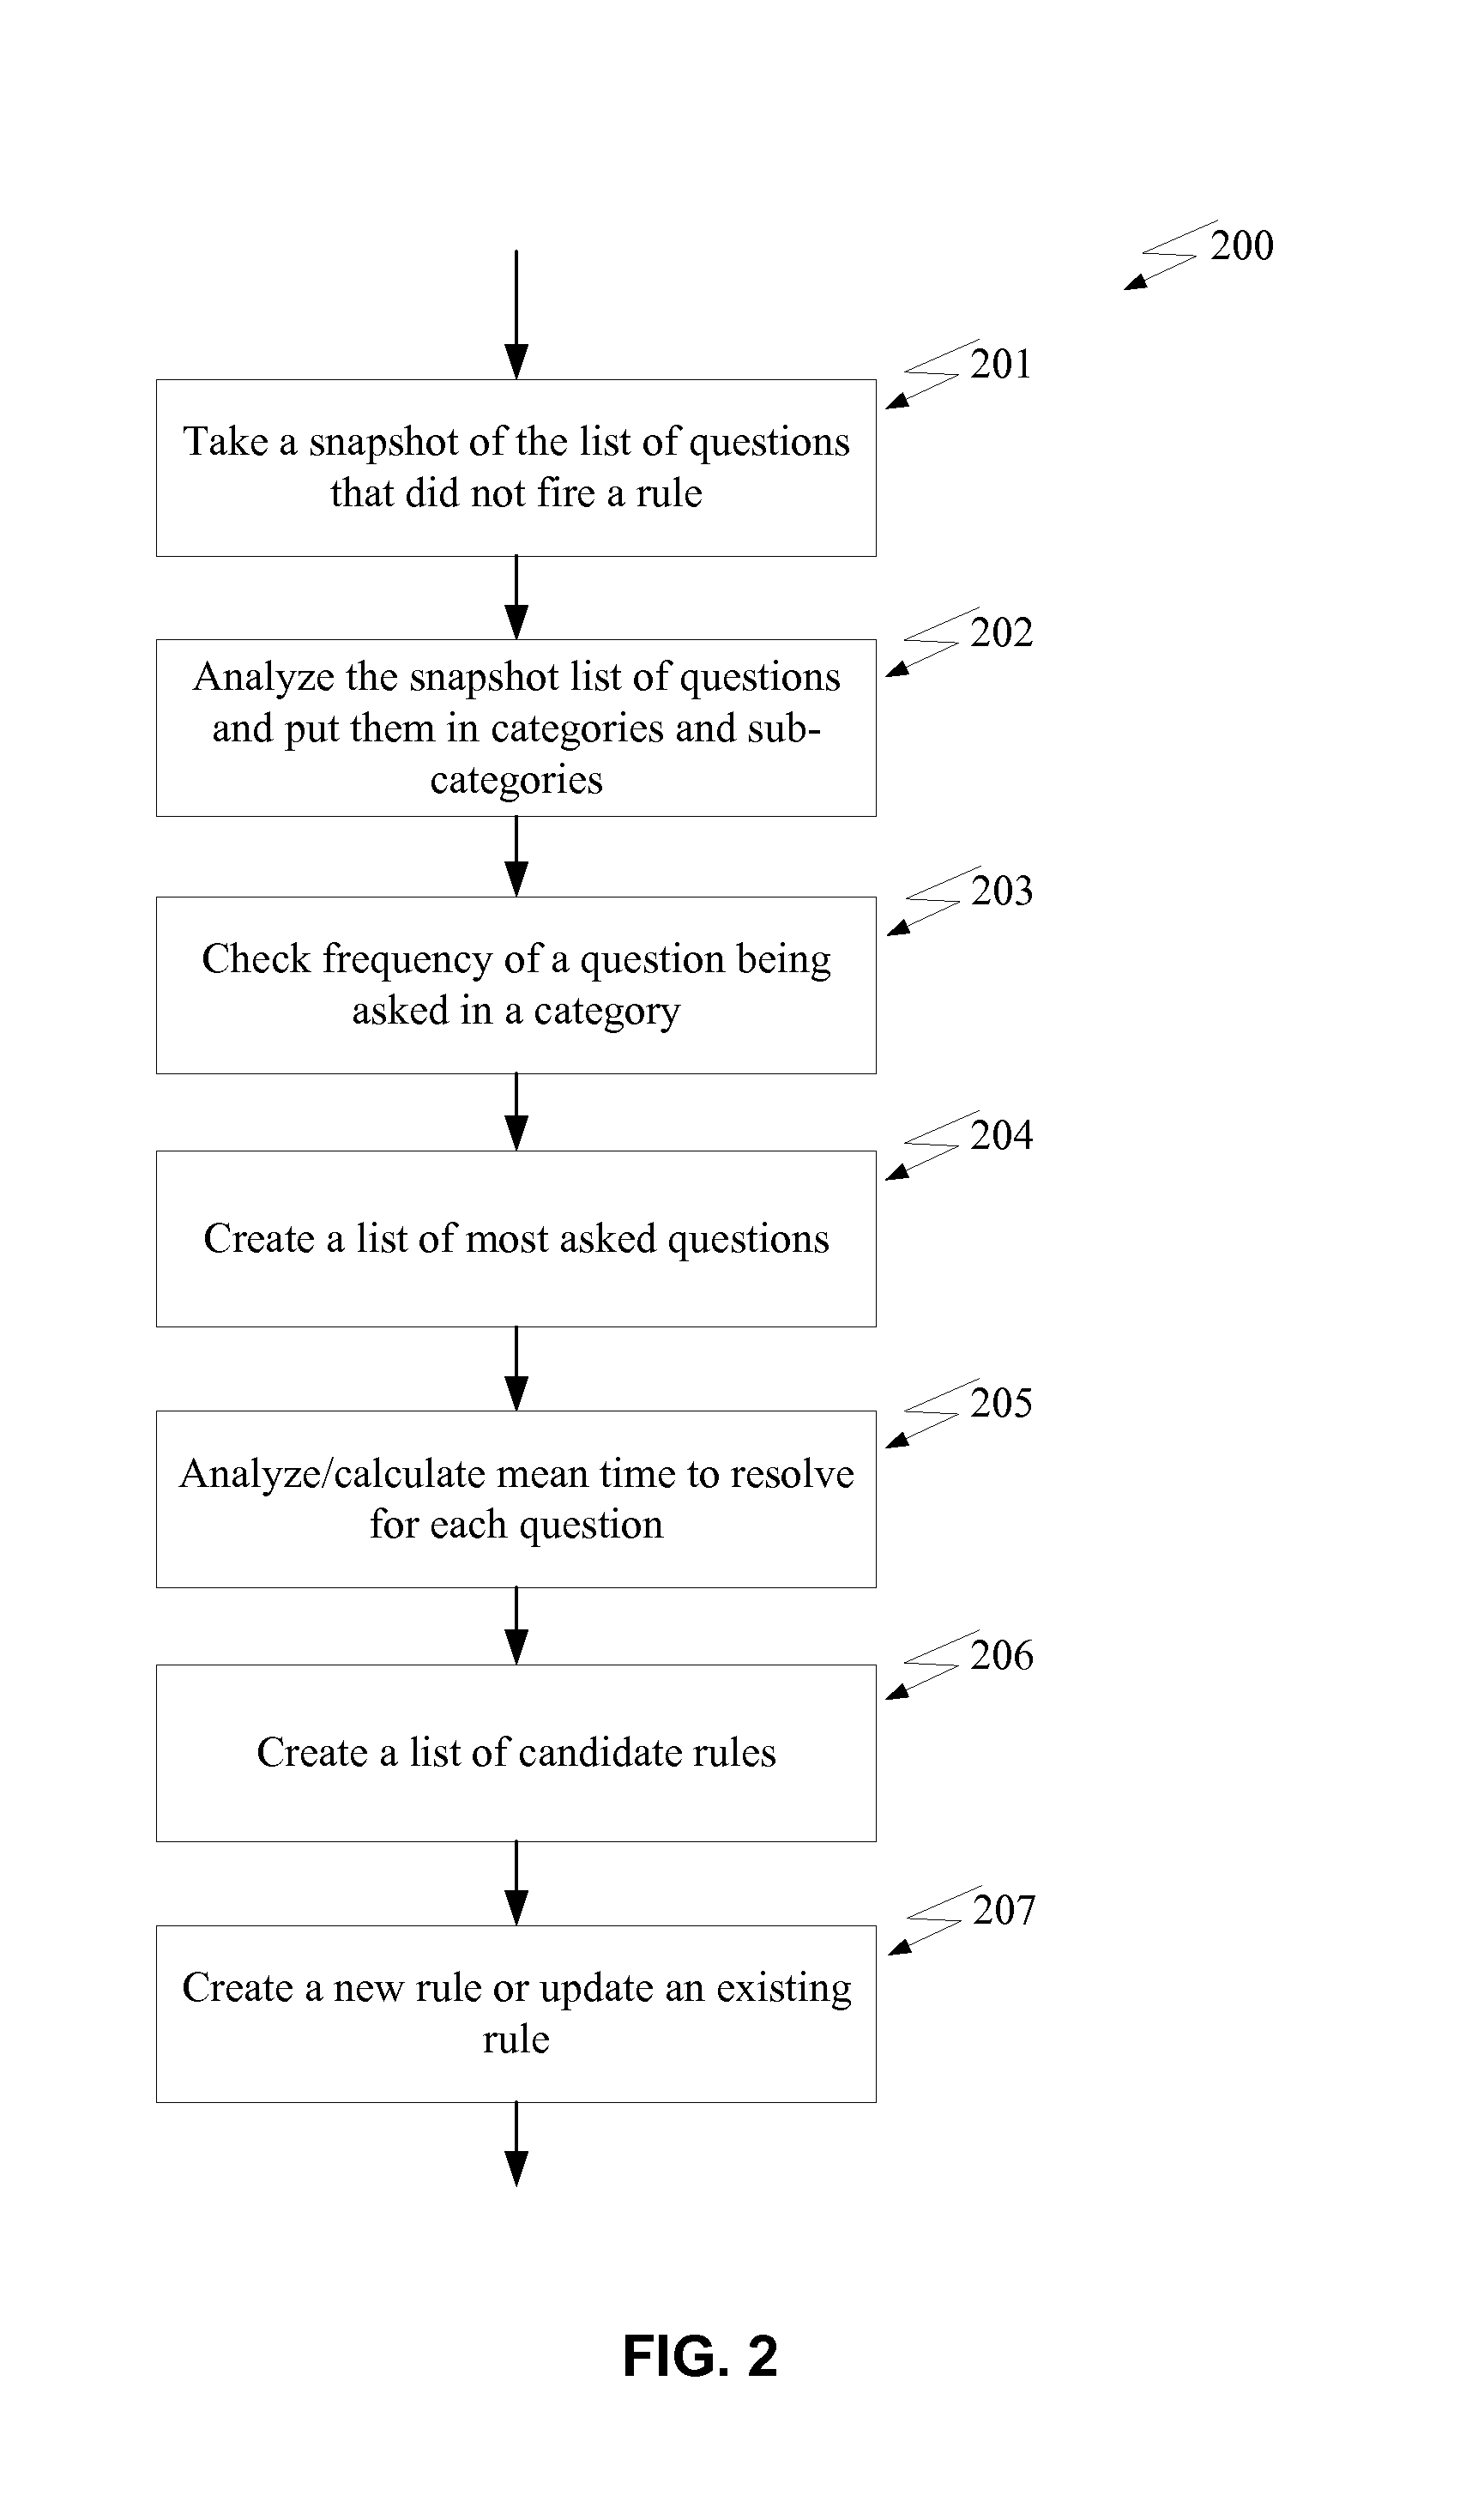 System and method of rule creation based on frequency of question